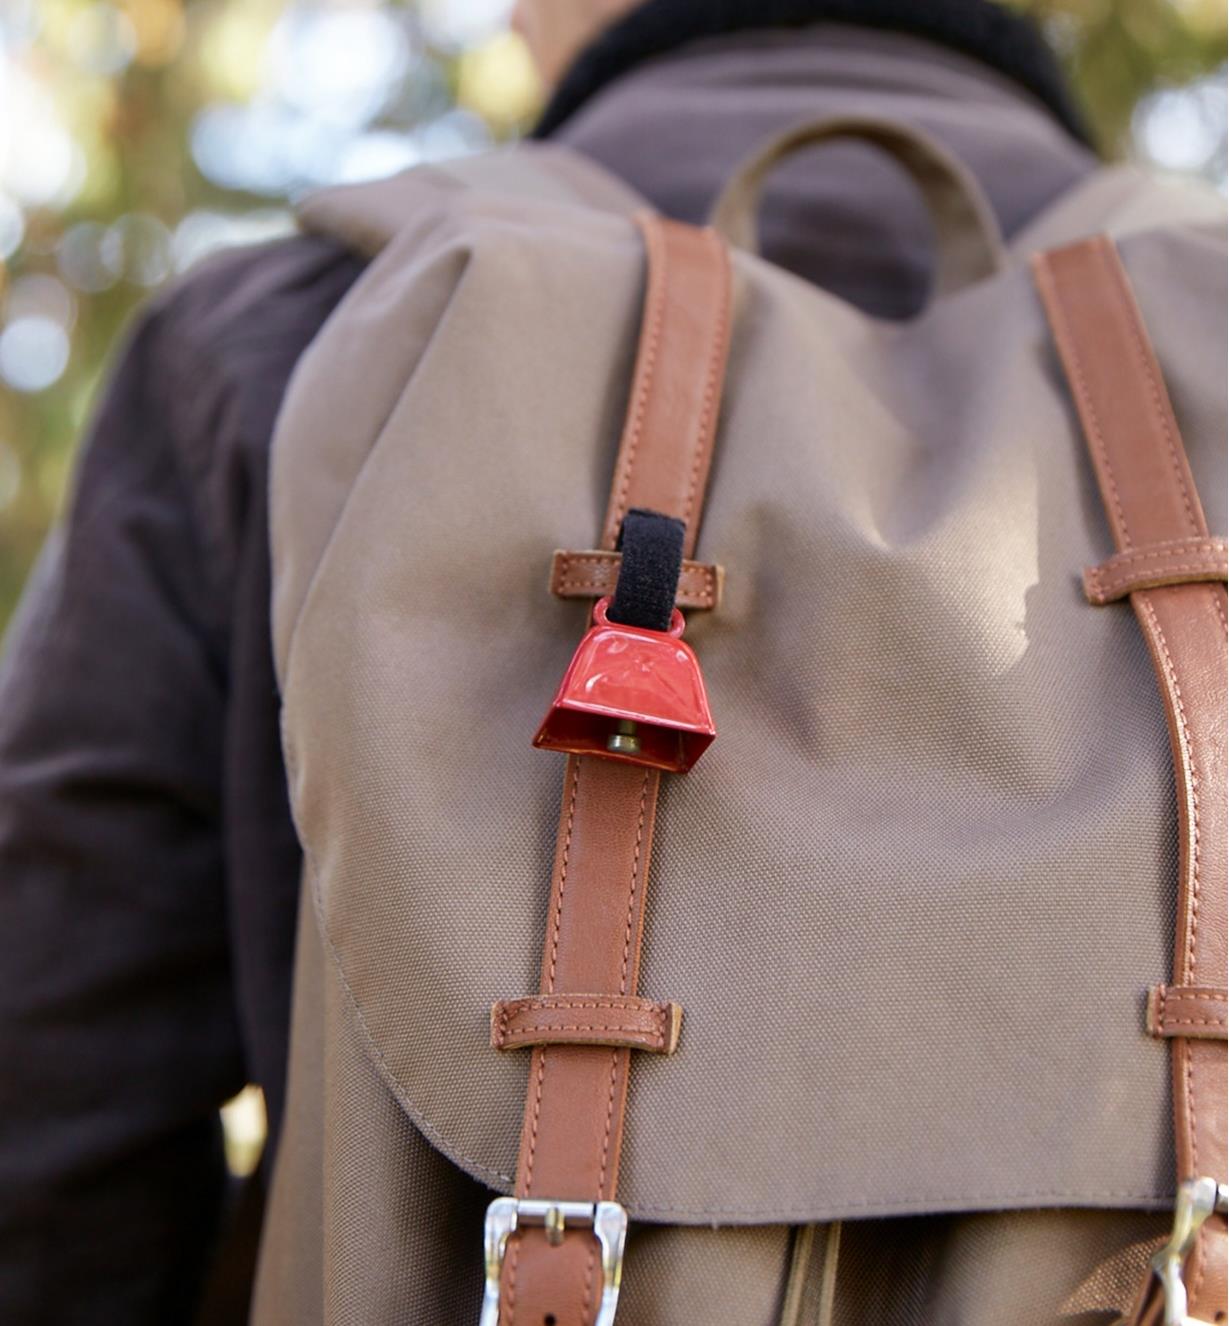 Bear bell attached to a backpack by its Velcro strap